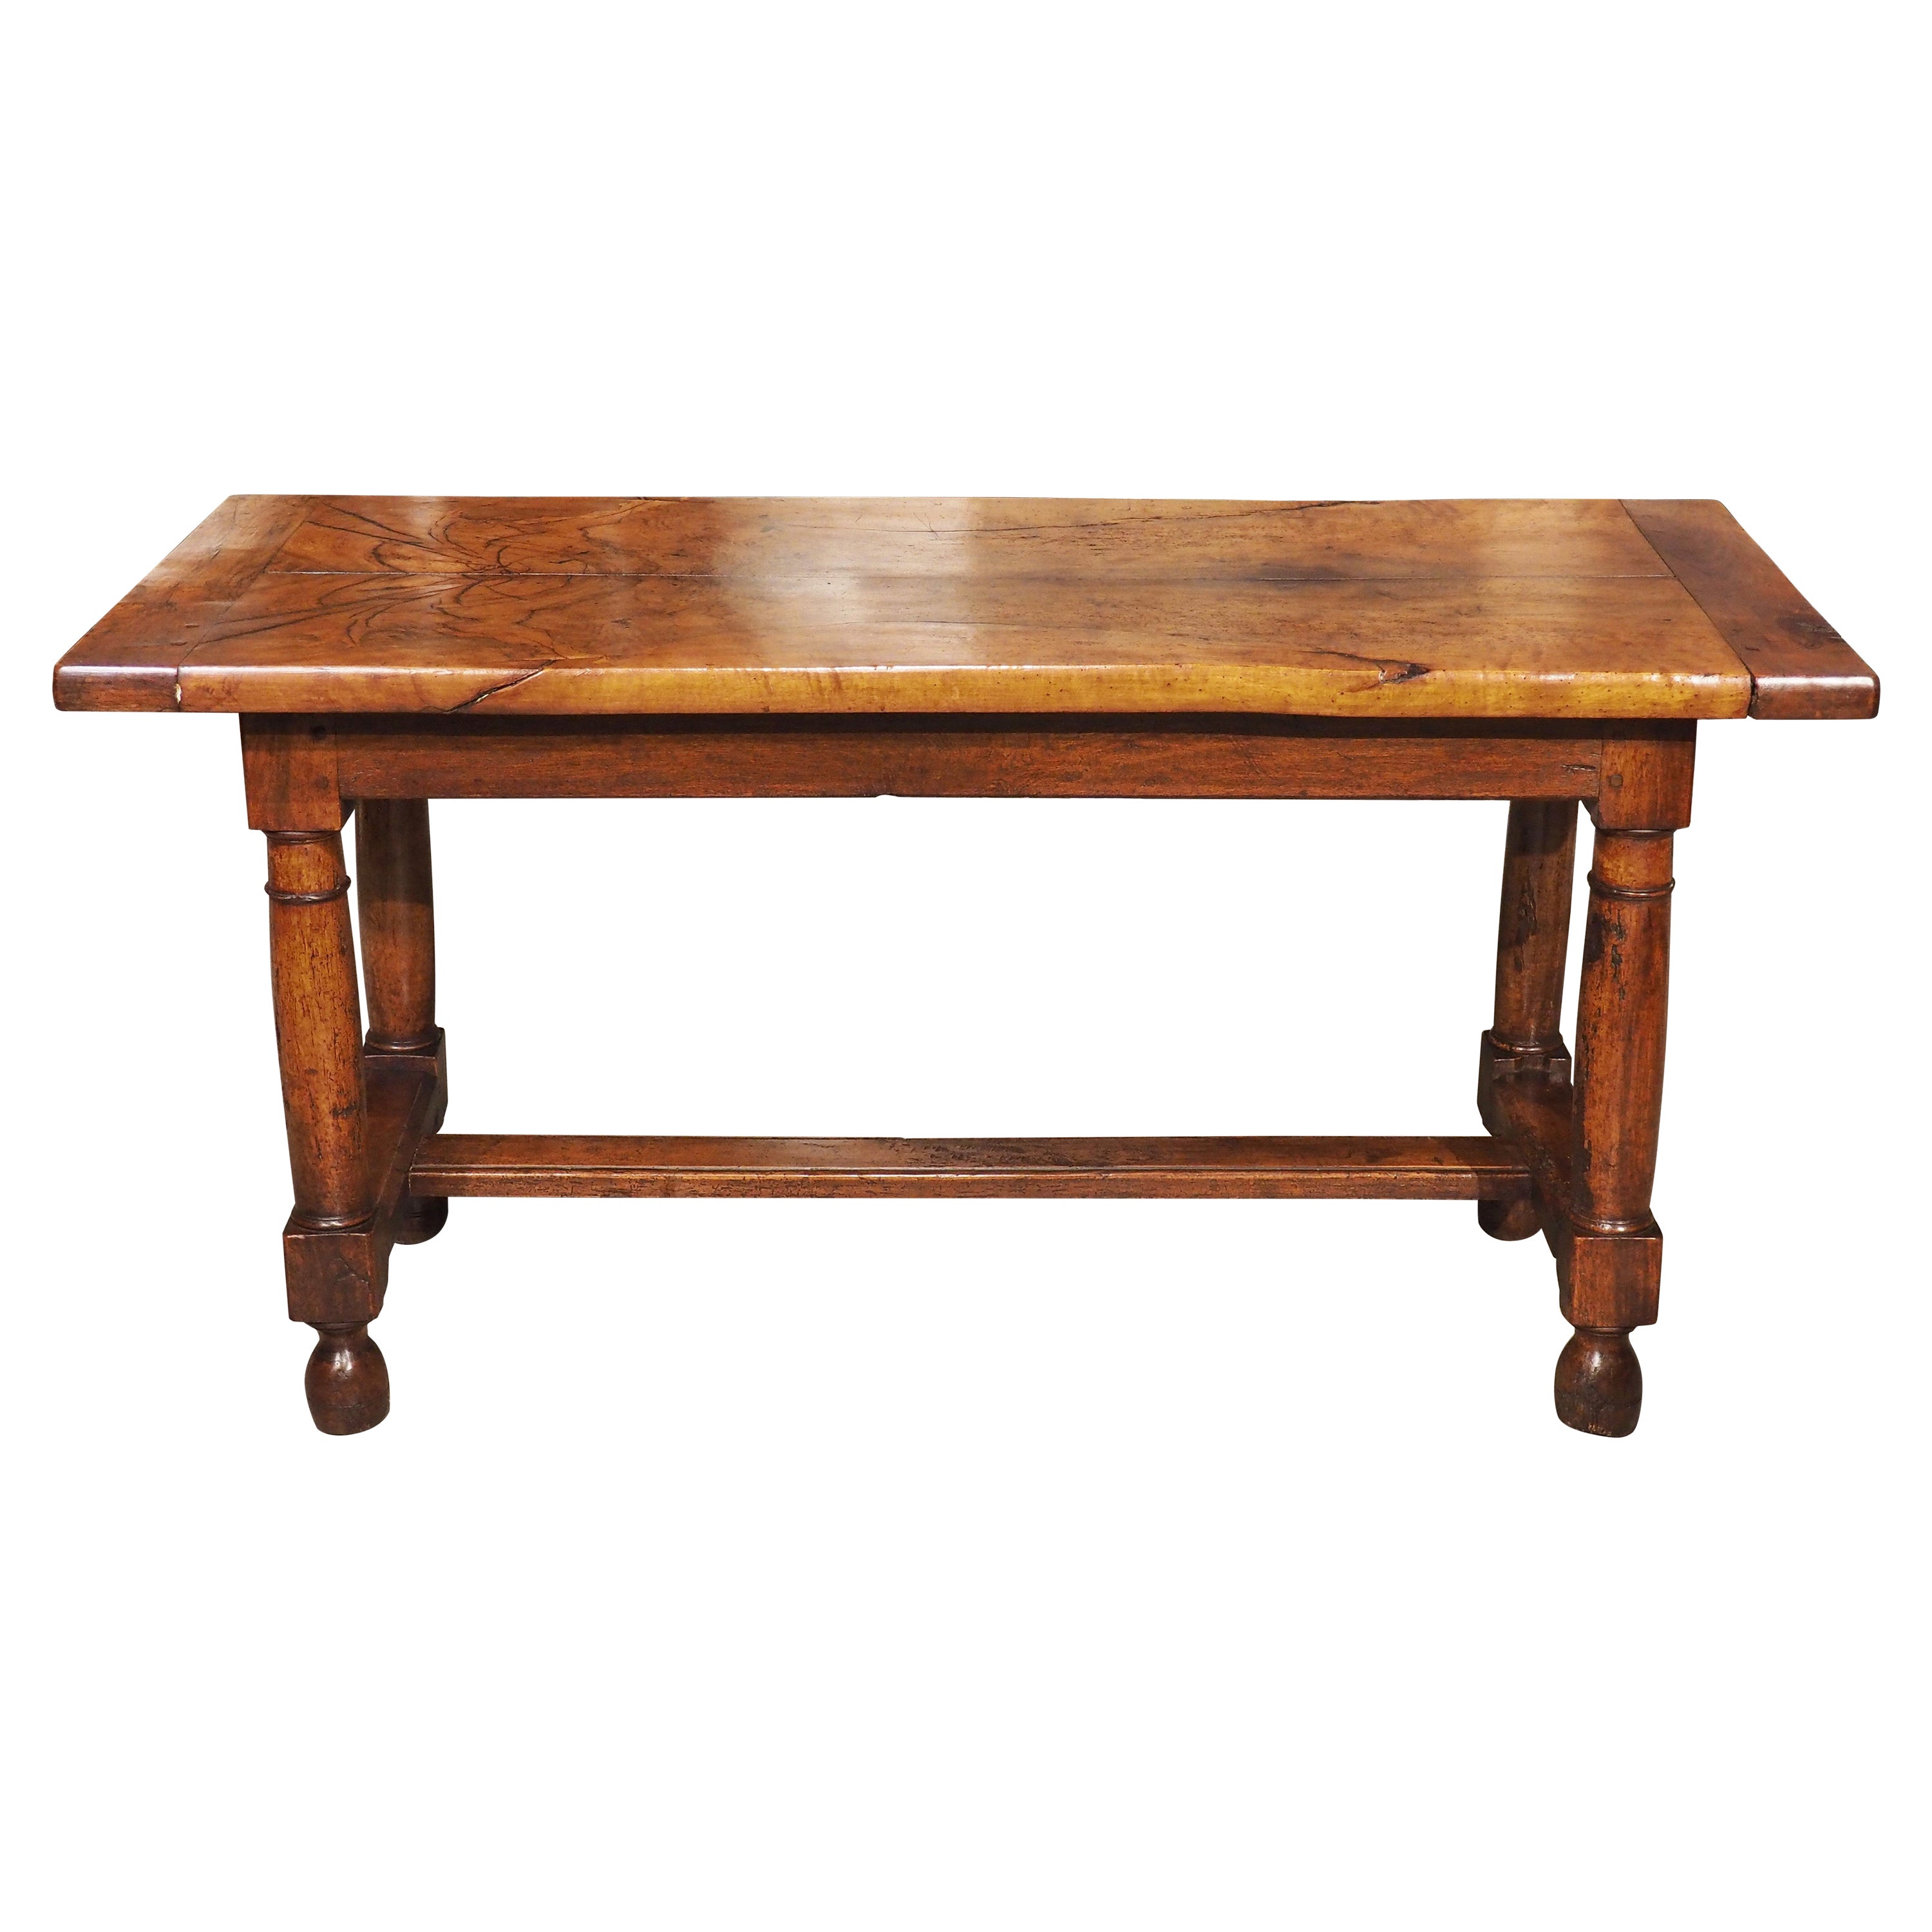 19th Century Single Burl Walnut Plank Table from Normandy, France For Sale